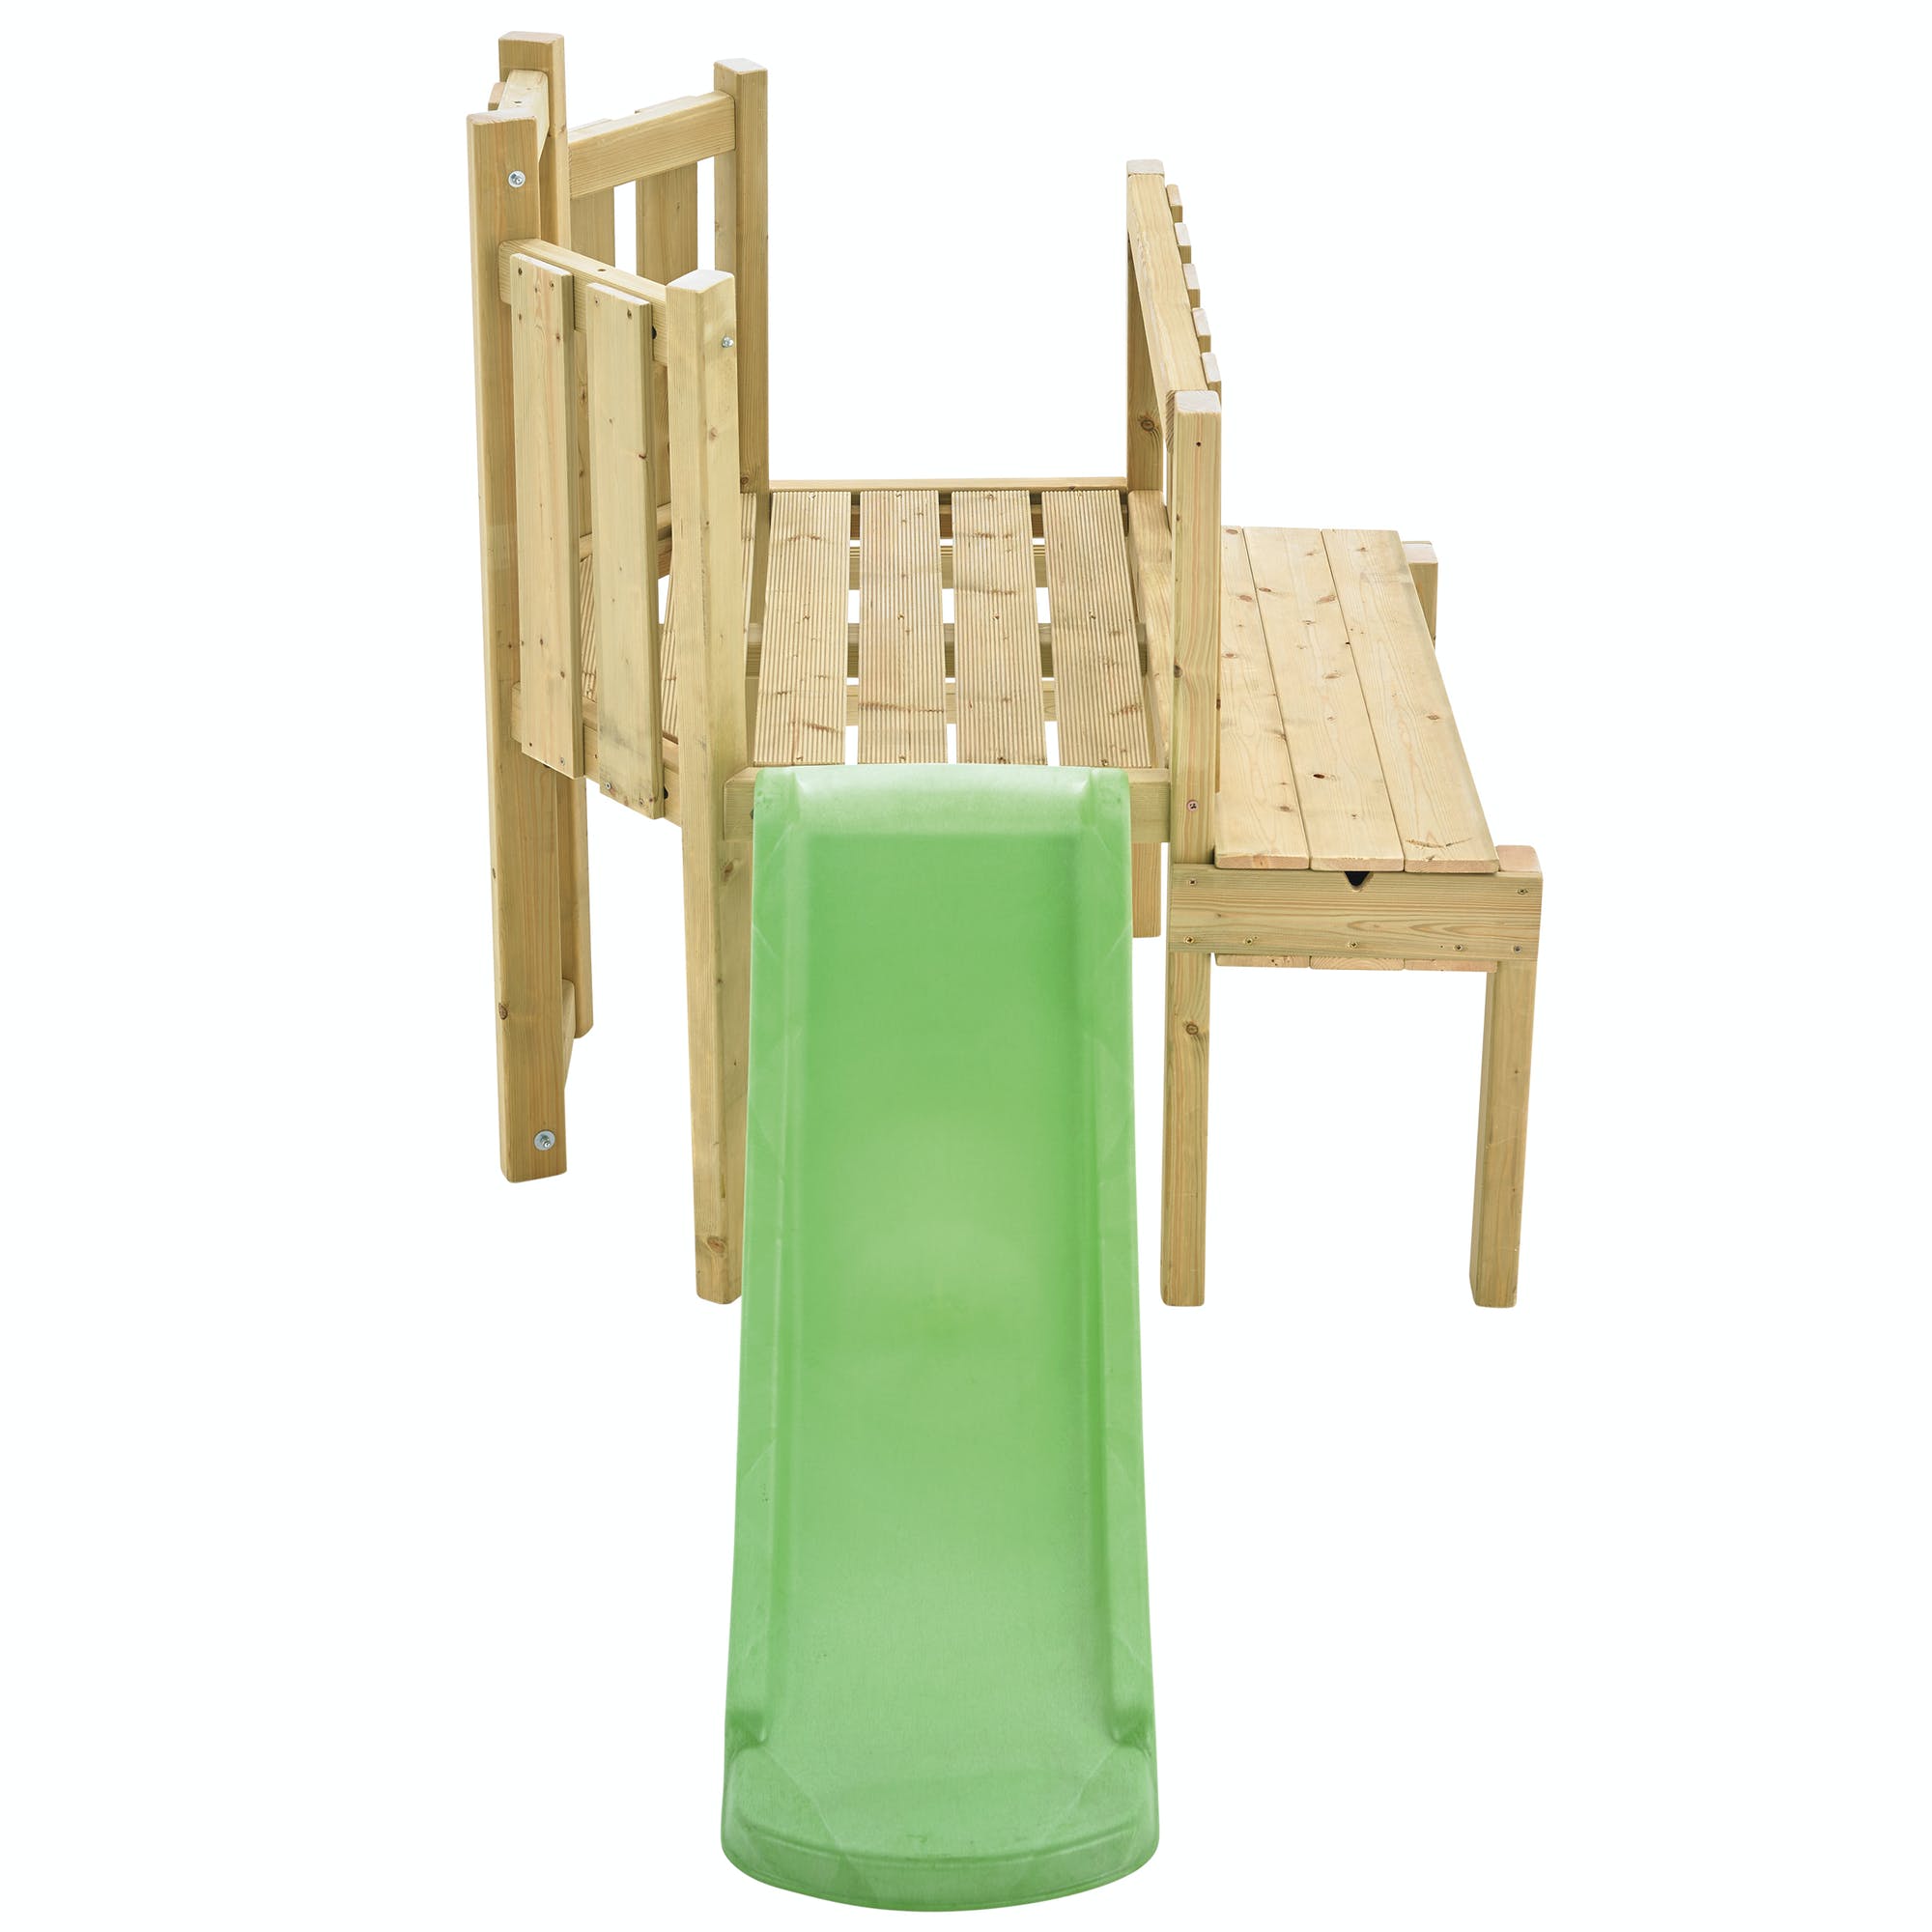 Early Fun Sandpit and Play Tower